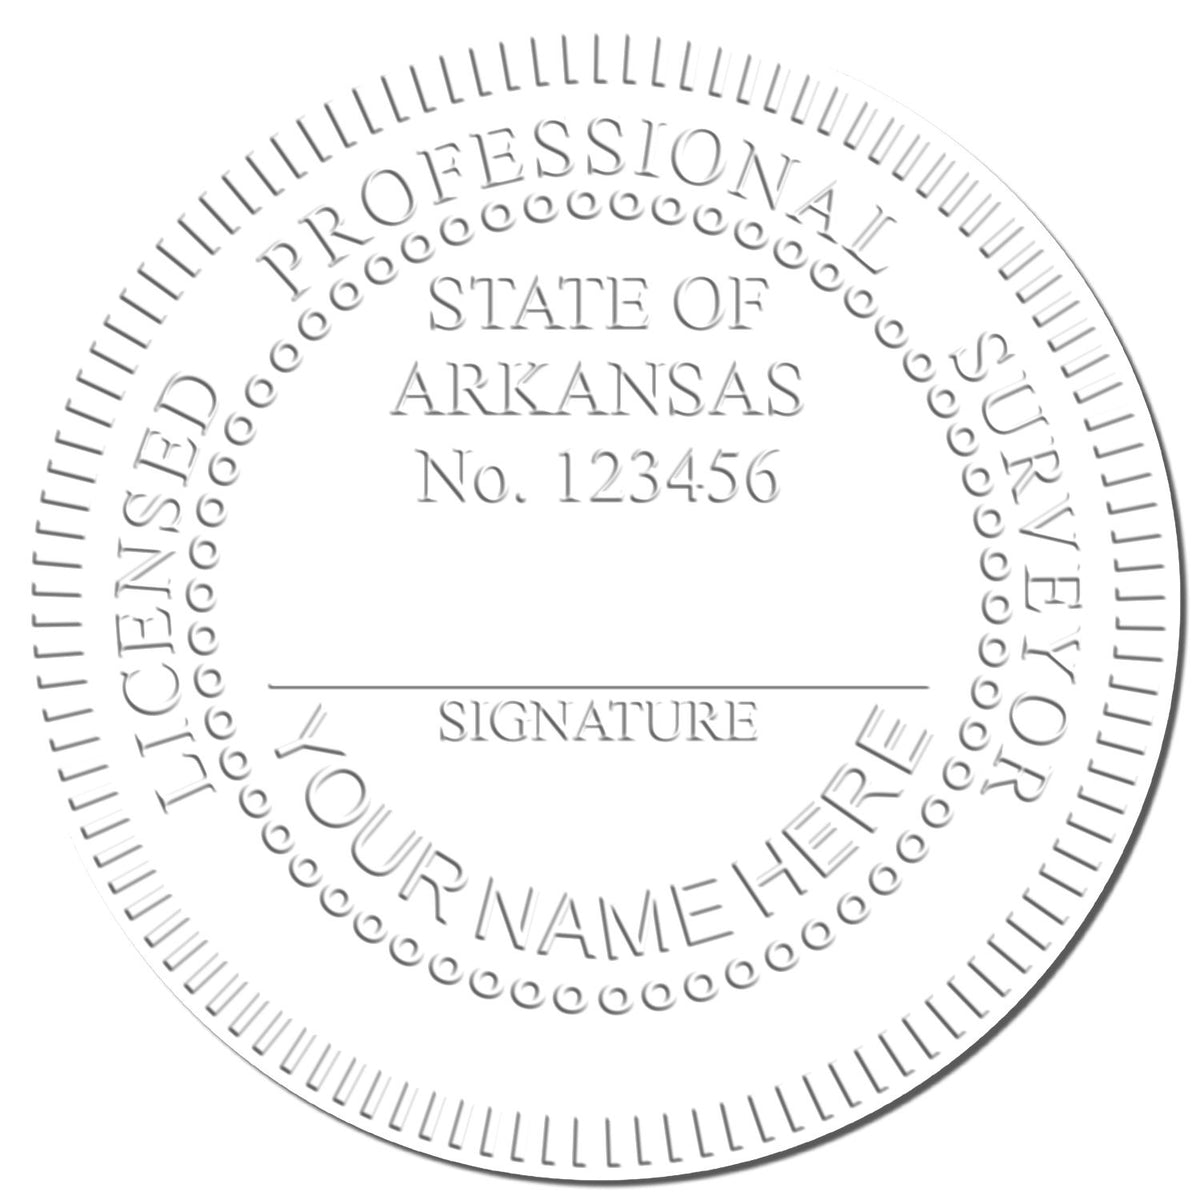 This paper is stamped with a sample imprint of the Handheld Arkansas Land Surveyor Seal, signifying its quality and reliability.